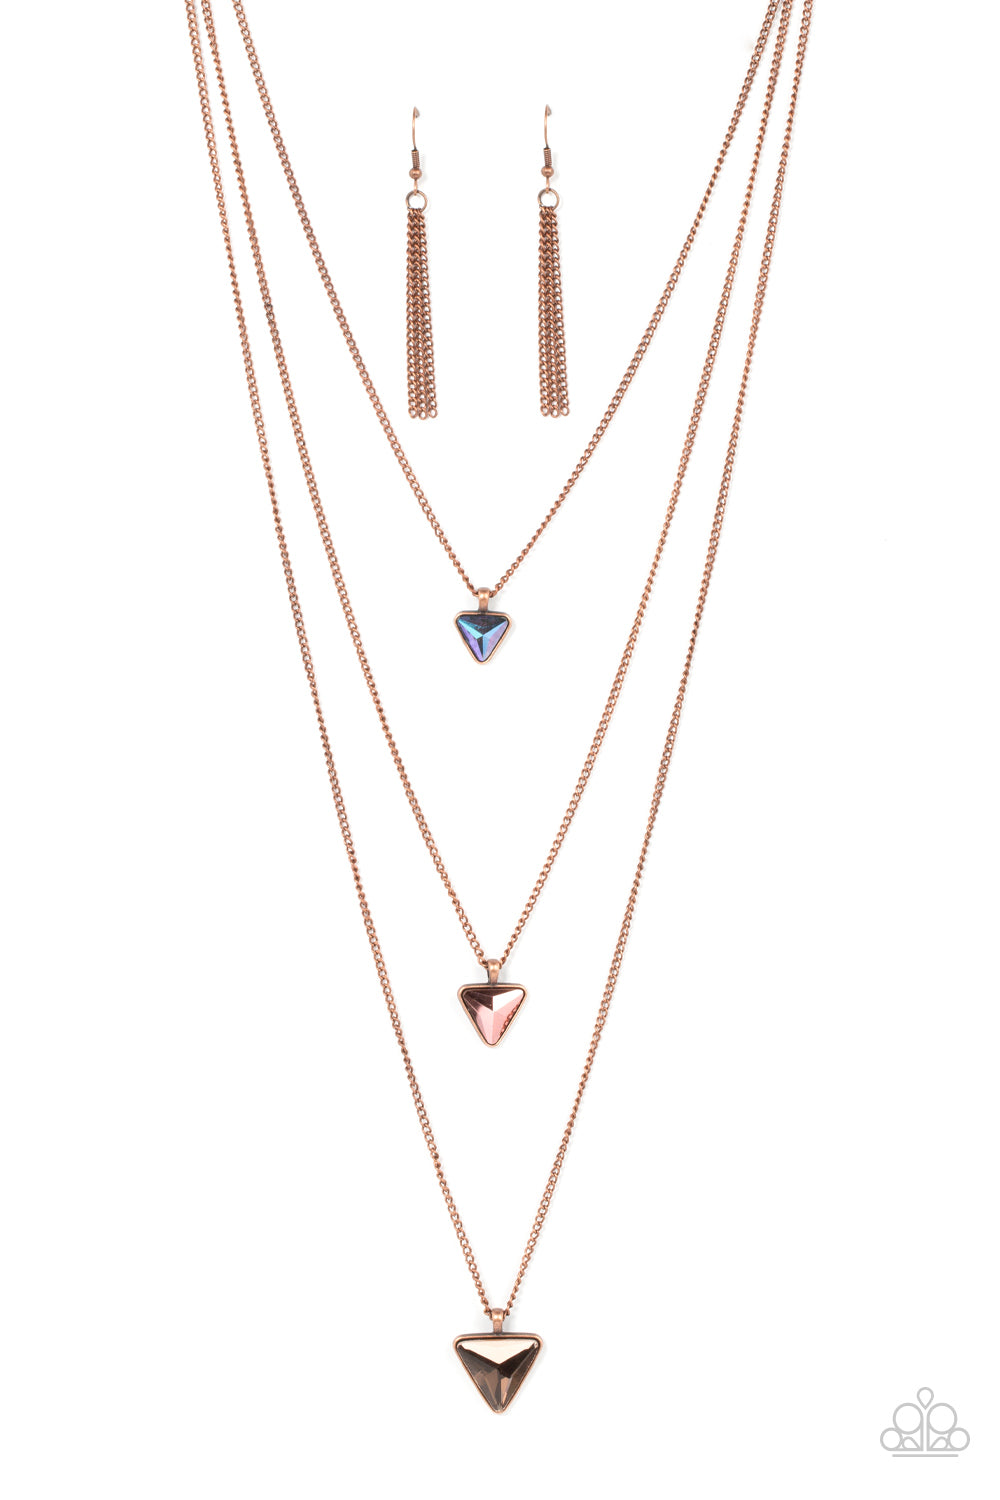 Follow the LUSTER - copper - Paparazzi necklace